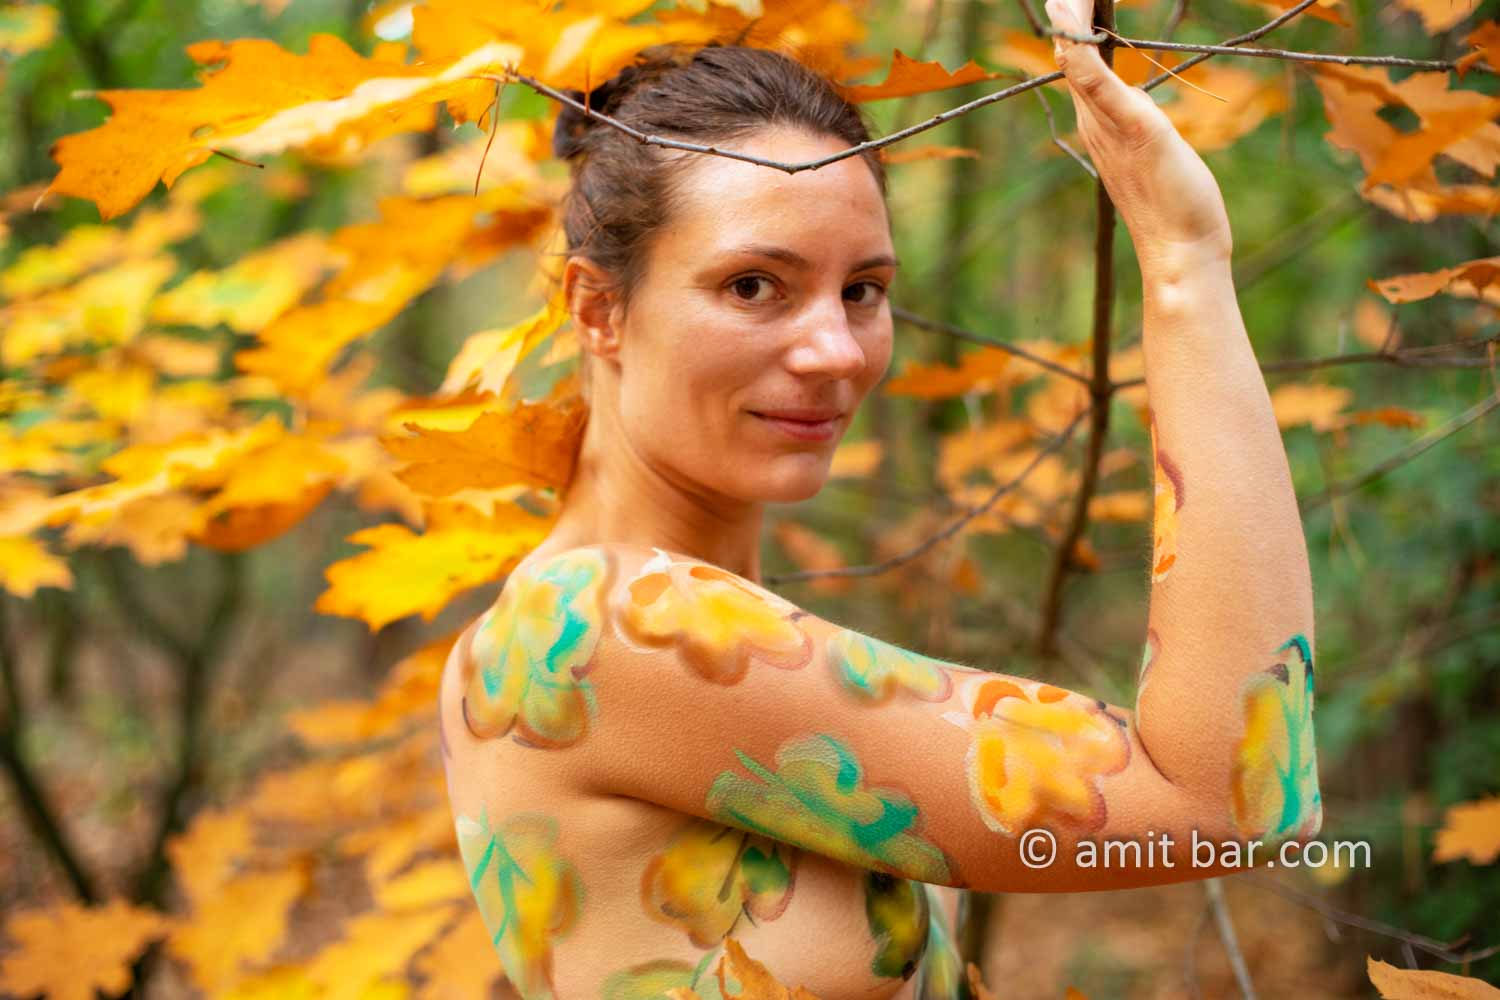 Body painted autumn leaves III: Autumn leaves painted on a model in the forest beside Doetinchem, The Netherlands